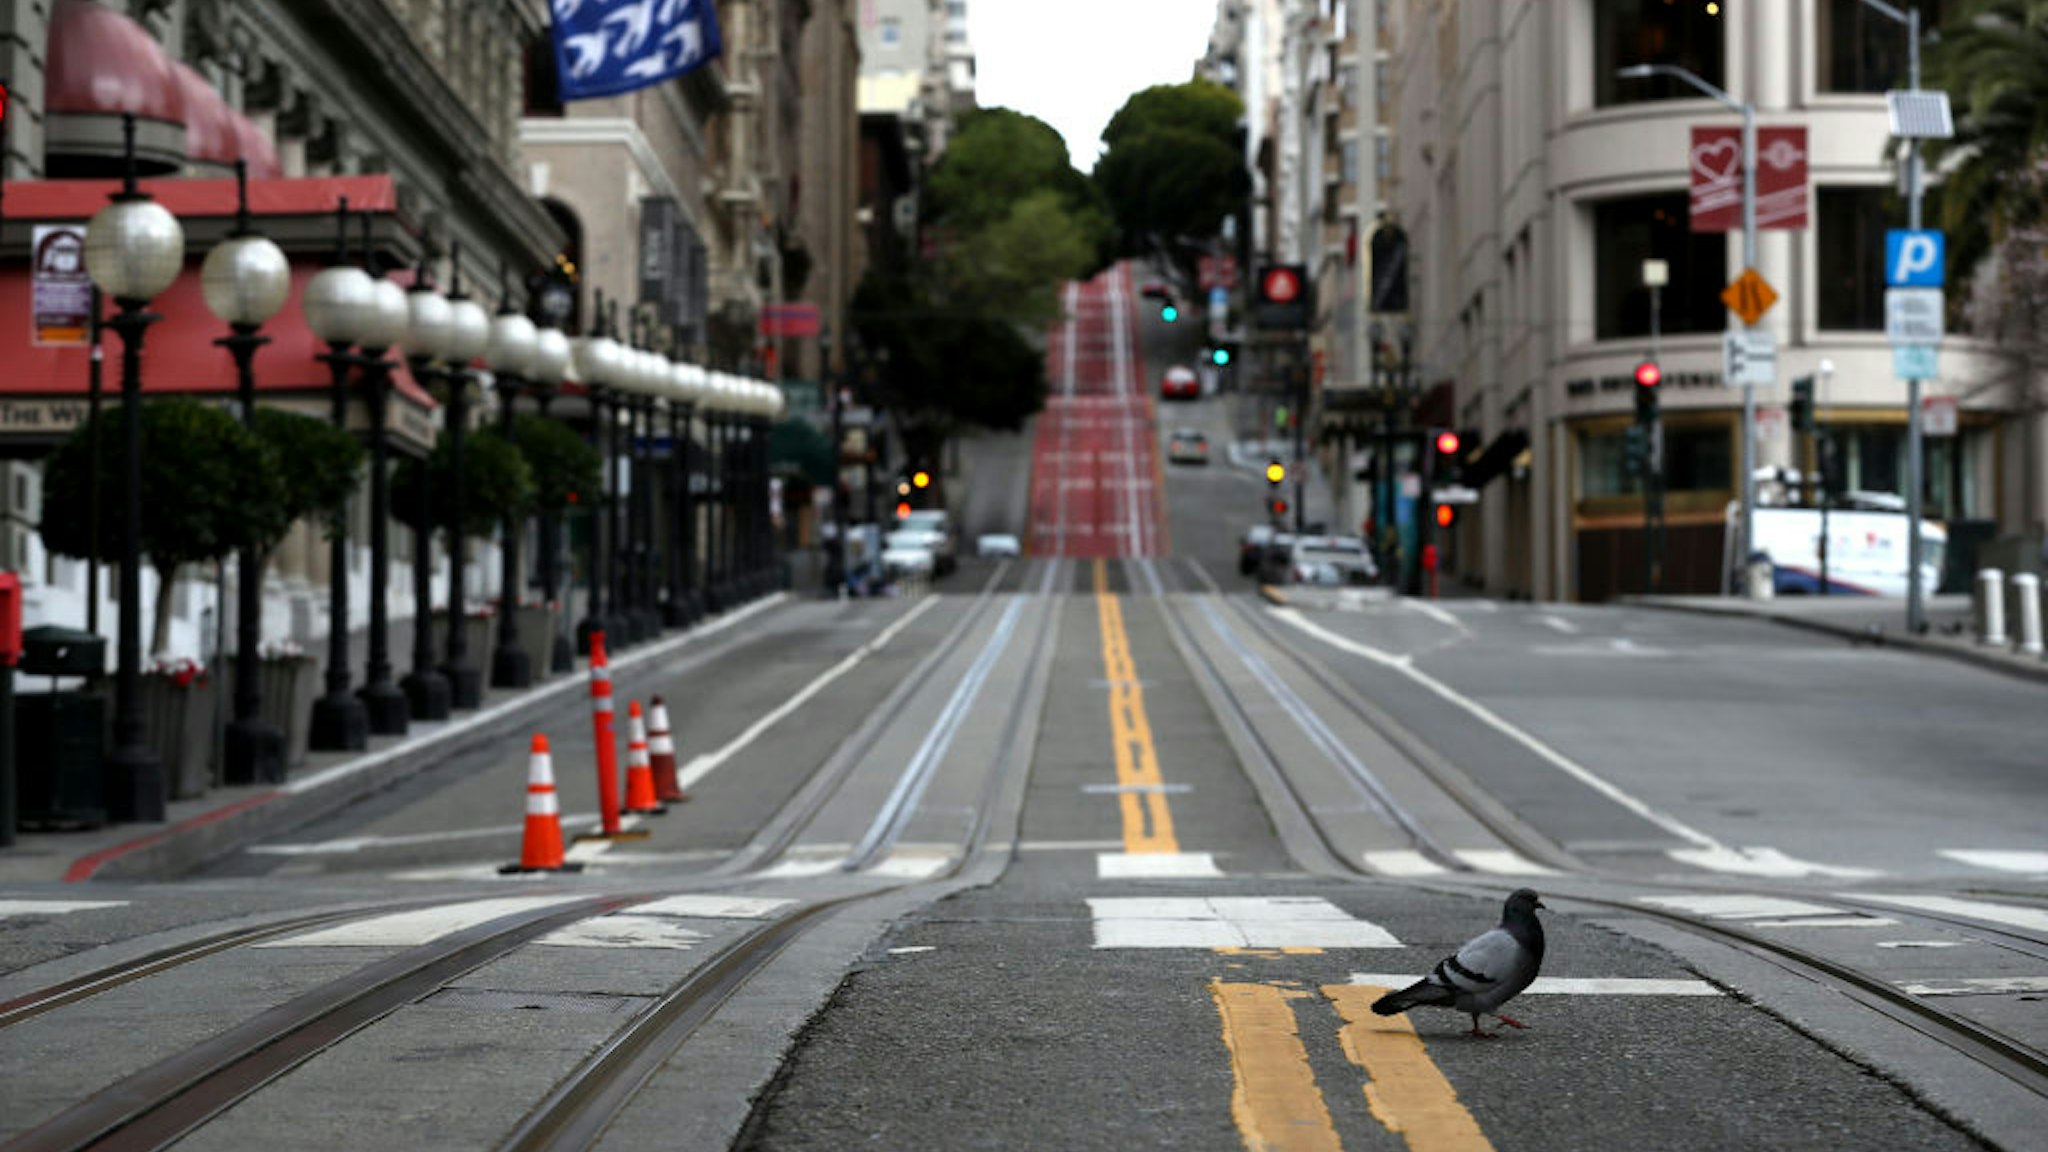 A pigeon crosses an empty Powell Street during the coronavirus pandemic on March 30, 2020 in San Francisco, California.